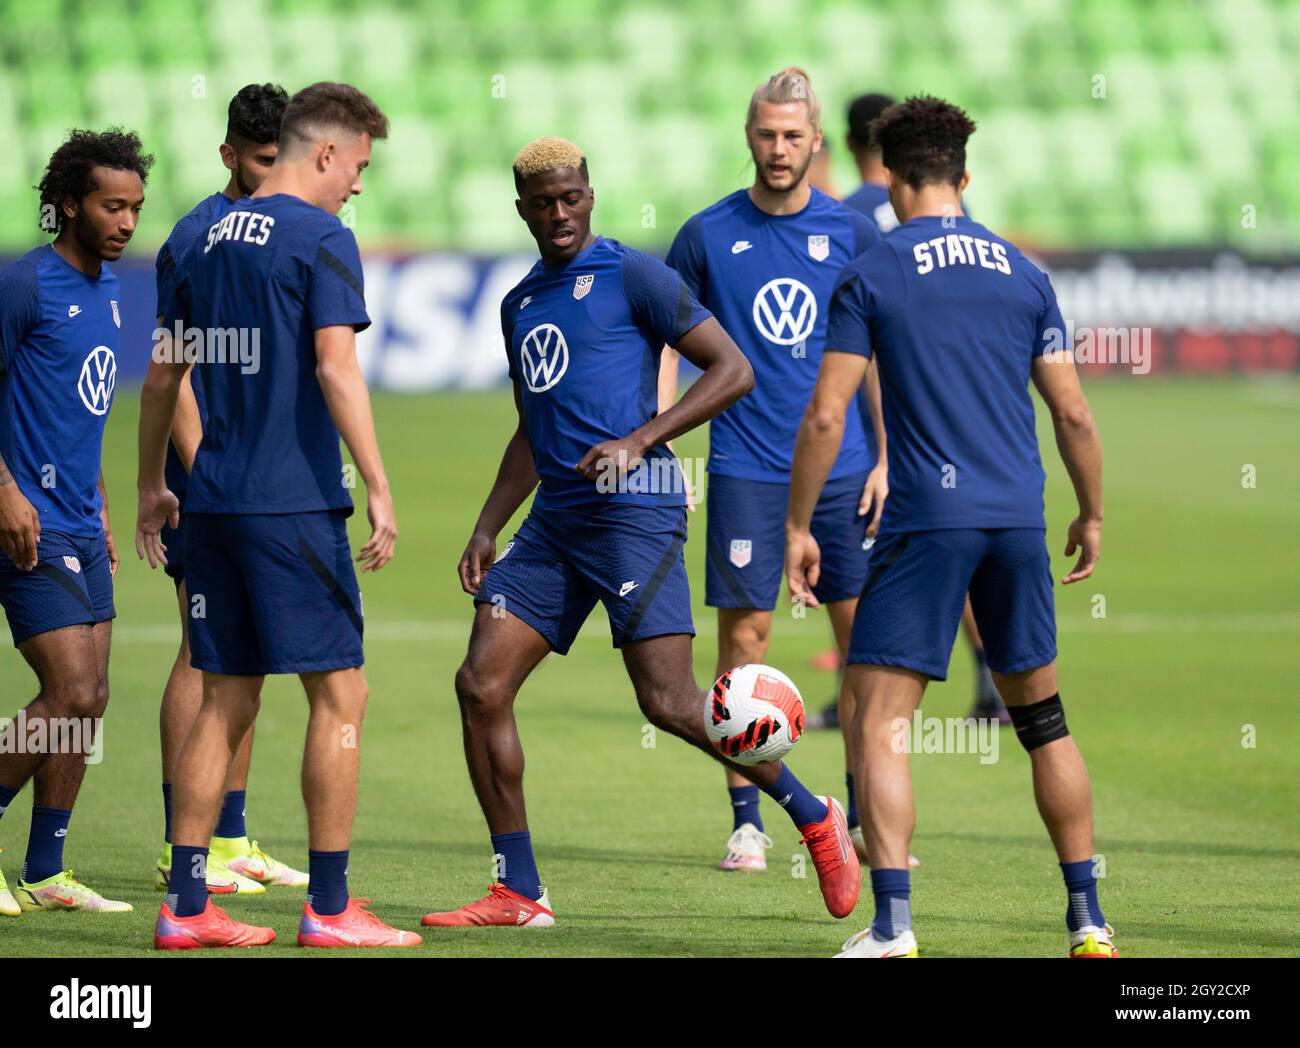 Austin, Texas, USA. 6th October, 2021. Forward GYASI ZARDES kicks the ball as members of the United States Men's National Team (USMNT) warm up for practice at Austin's Q2 stadium on Wednesday, October 6, 2021. The U.S. team will face Jamaica on Thursday in a World Cup qualifying match. Credit: Bob Daemmrich/Alamy Live News Stock Photo